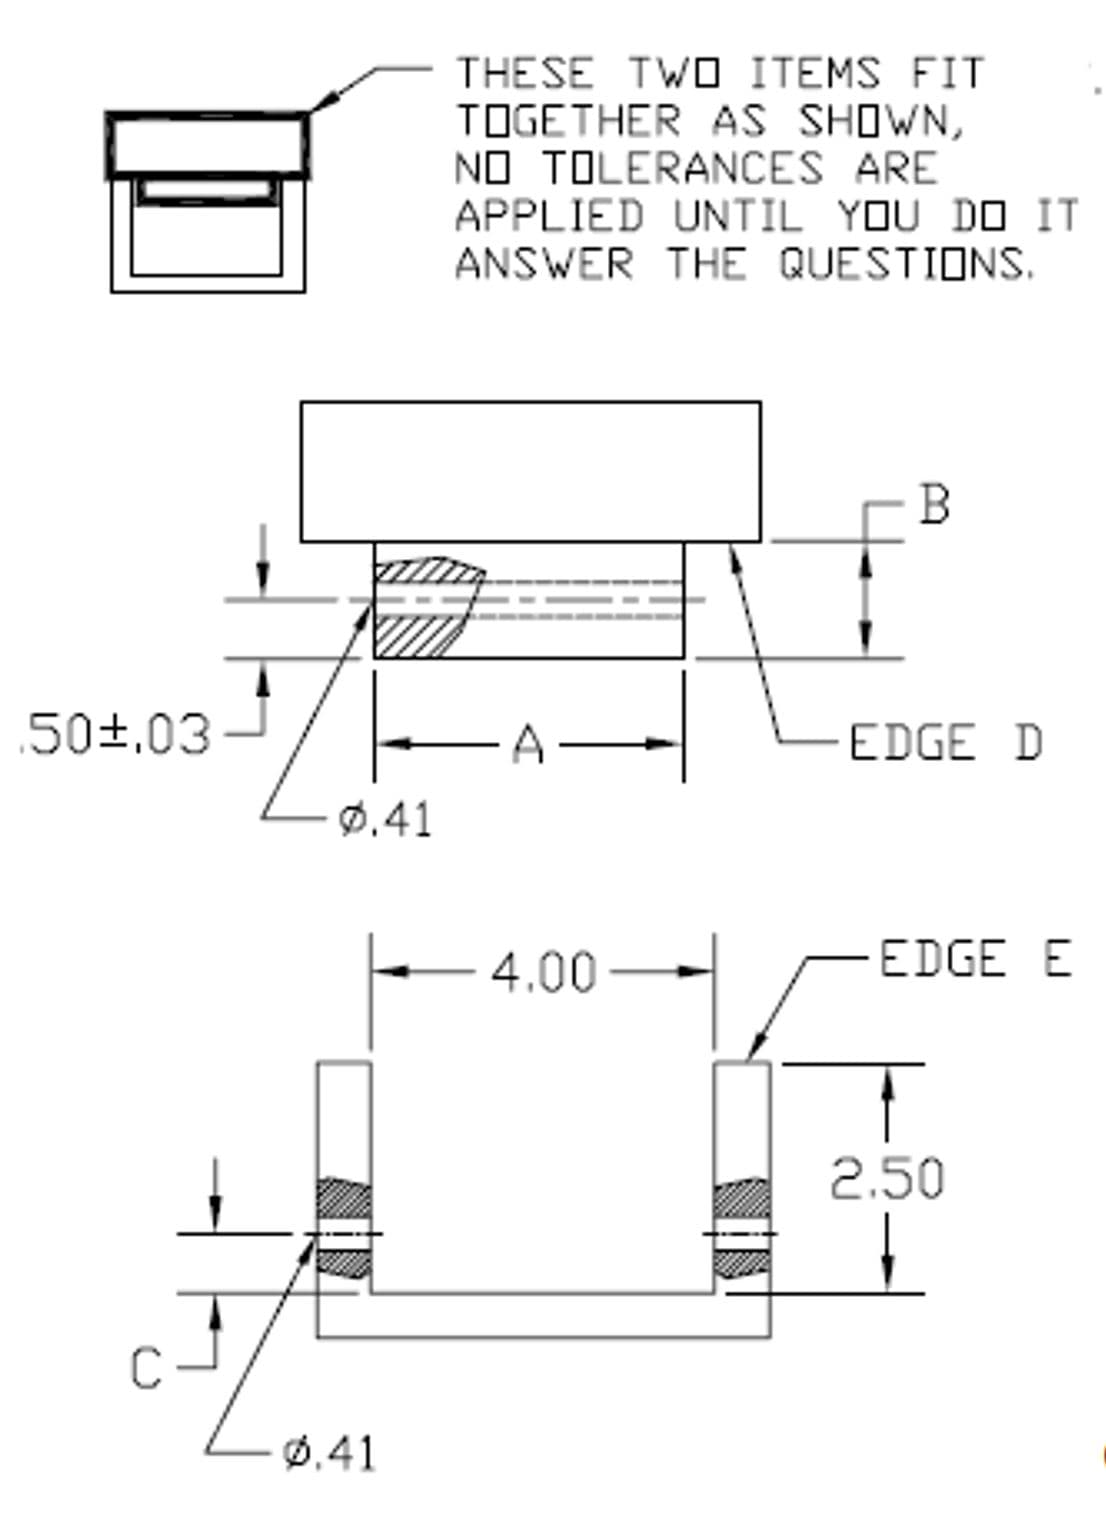 THESE TWO ITEMS FIT
TOGETHER AS SHOWN,
NO TOLERANCES ARE
APPLIED UNTIL YOU D0 IT
ANSWER THE QUESTIONS.
.50±,03
A -
EDGE D
Ø.41
4.00
-EDGE E
2.50
Ø,41
